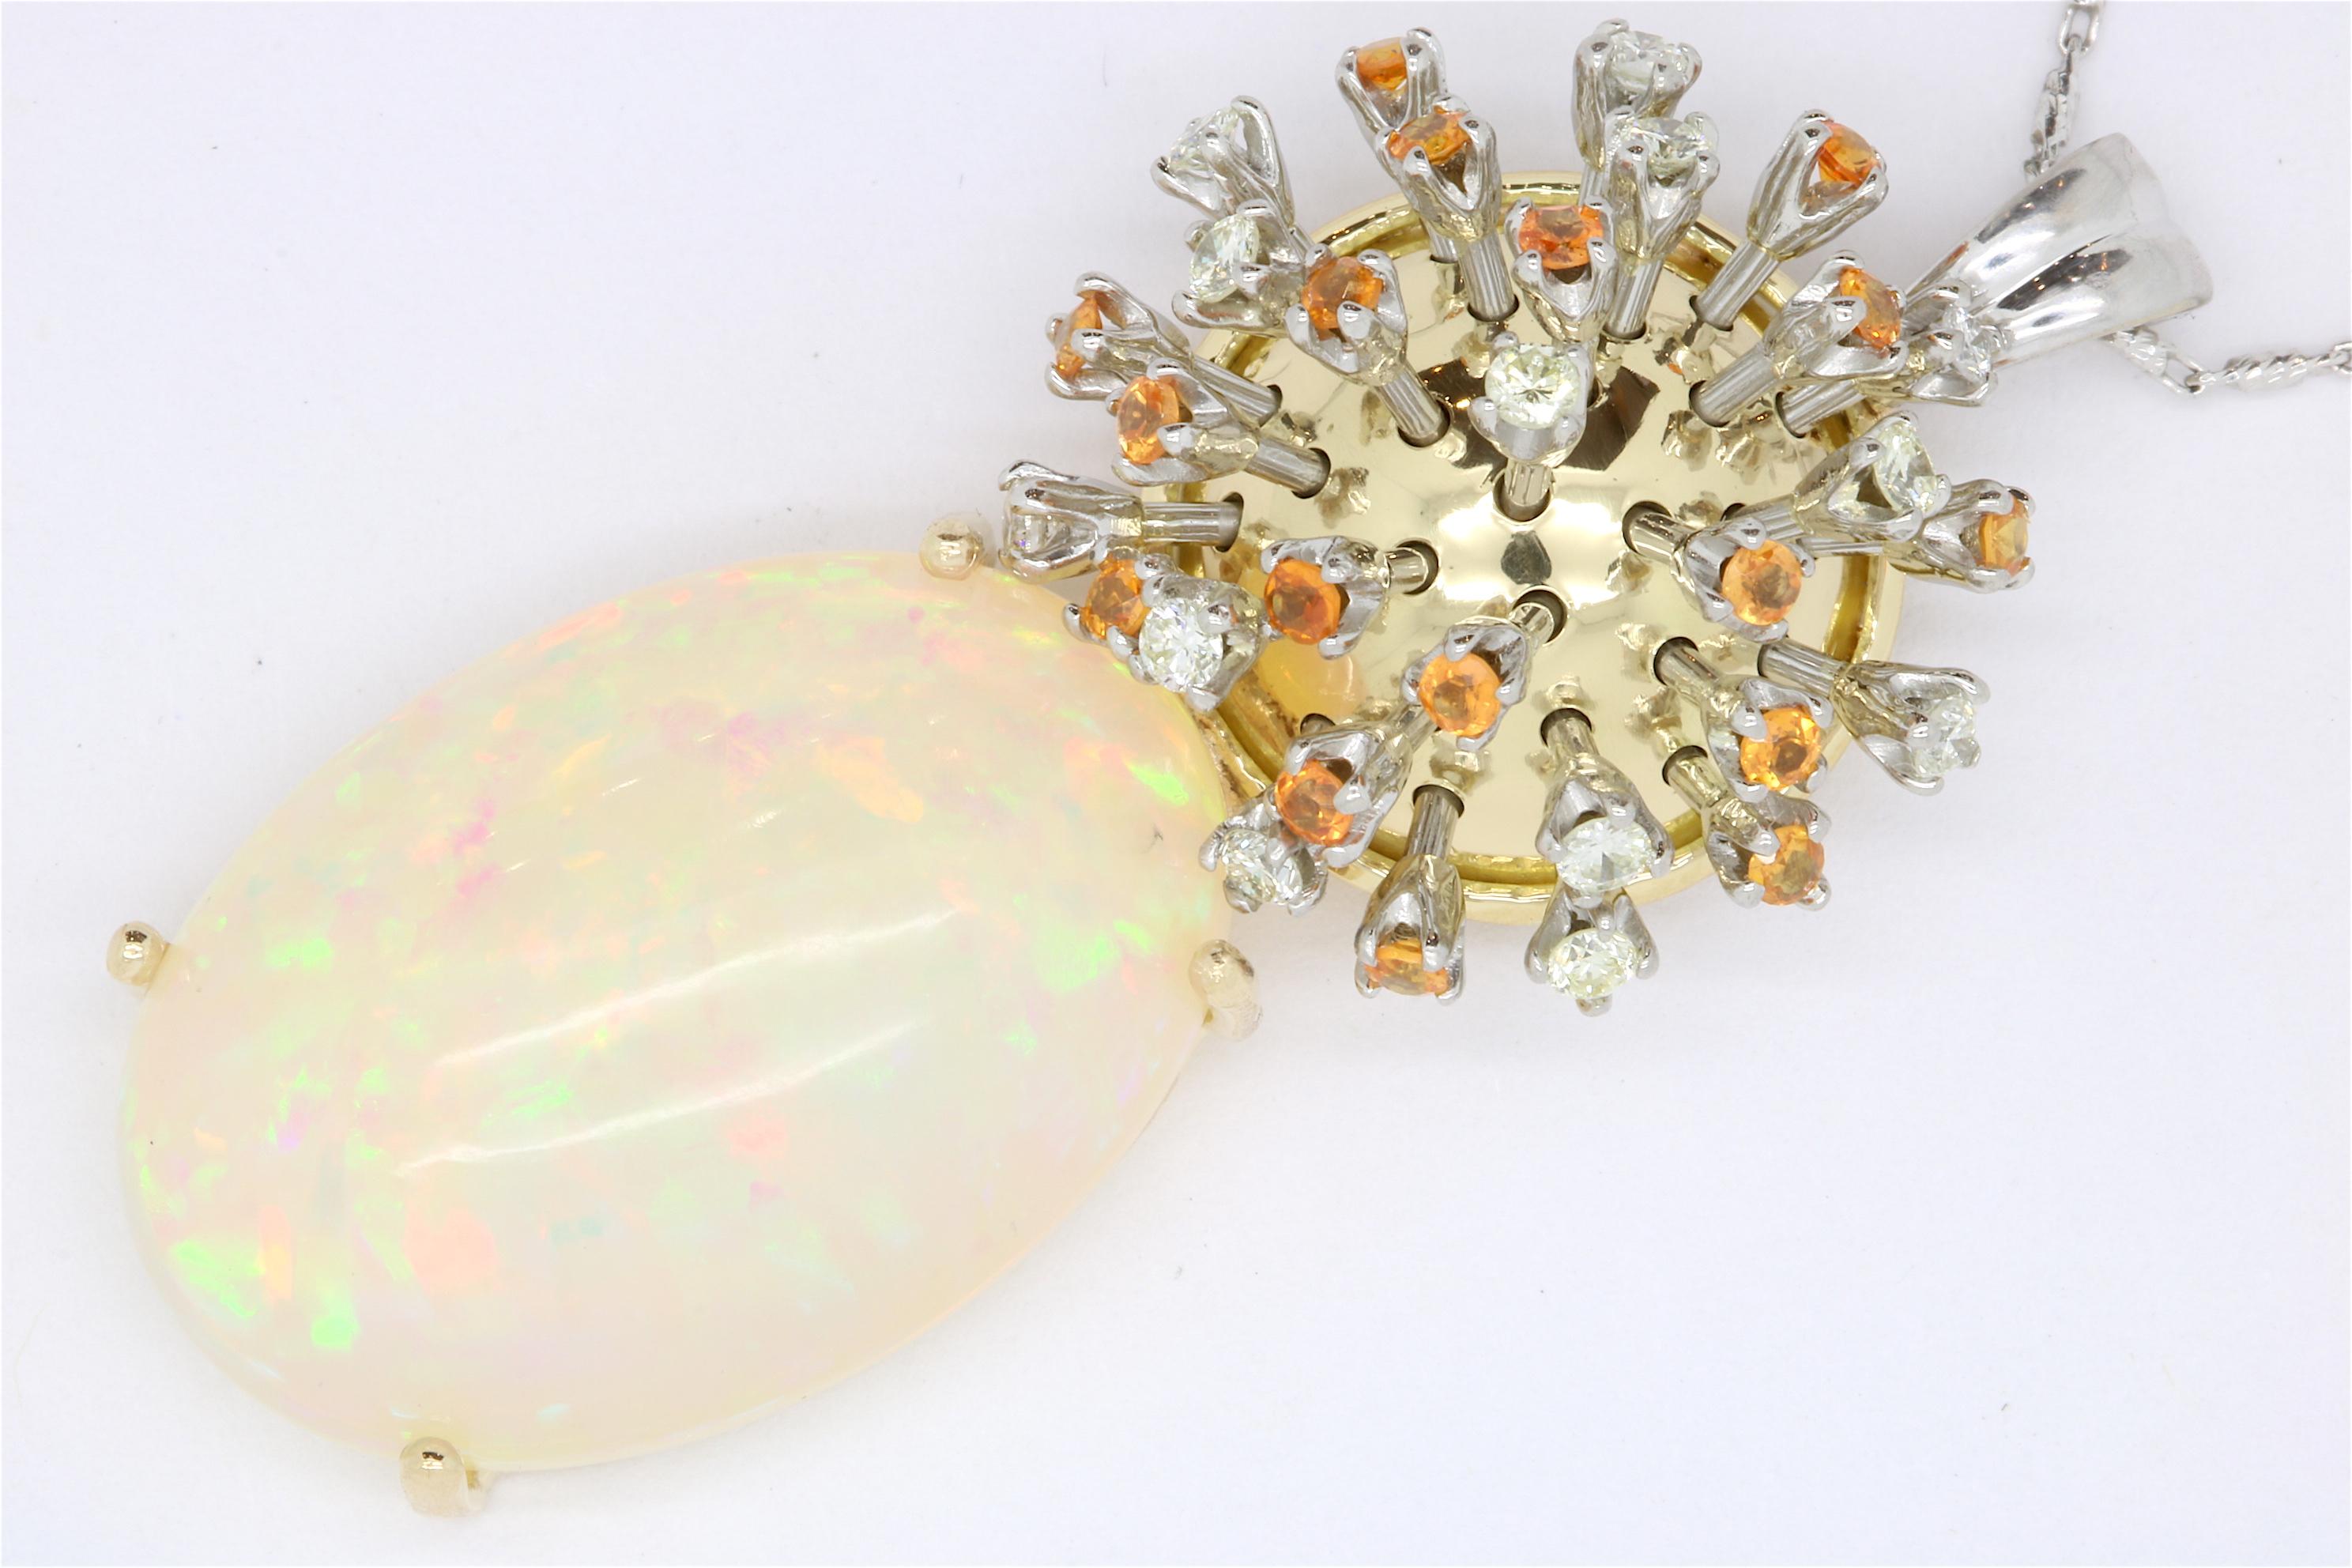 Material: 14k Two Tone Gold 
Center Stone Detail:  1 Oval Opal at 18.19 Carats
Stone Details:  13 Round White Diamonds at 0.51 Carats - Clarity: SI / Color: H-I, 17 Orange Sapphires at 0.65 Carats
Chain Length:  18 Inch

Fine one-of-a kind